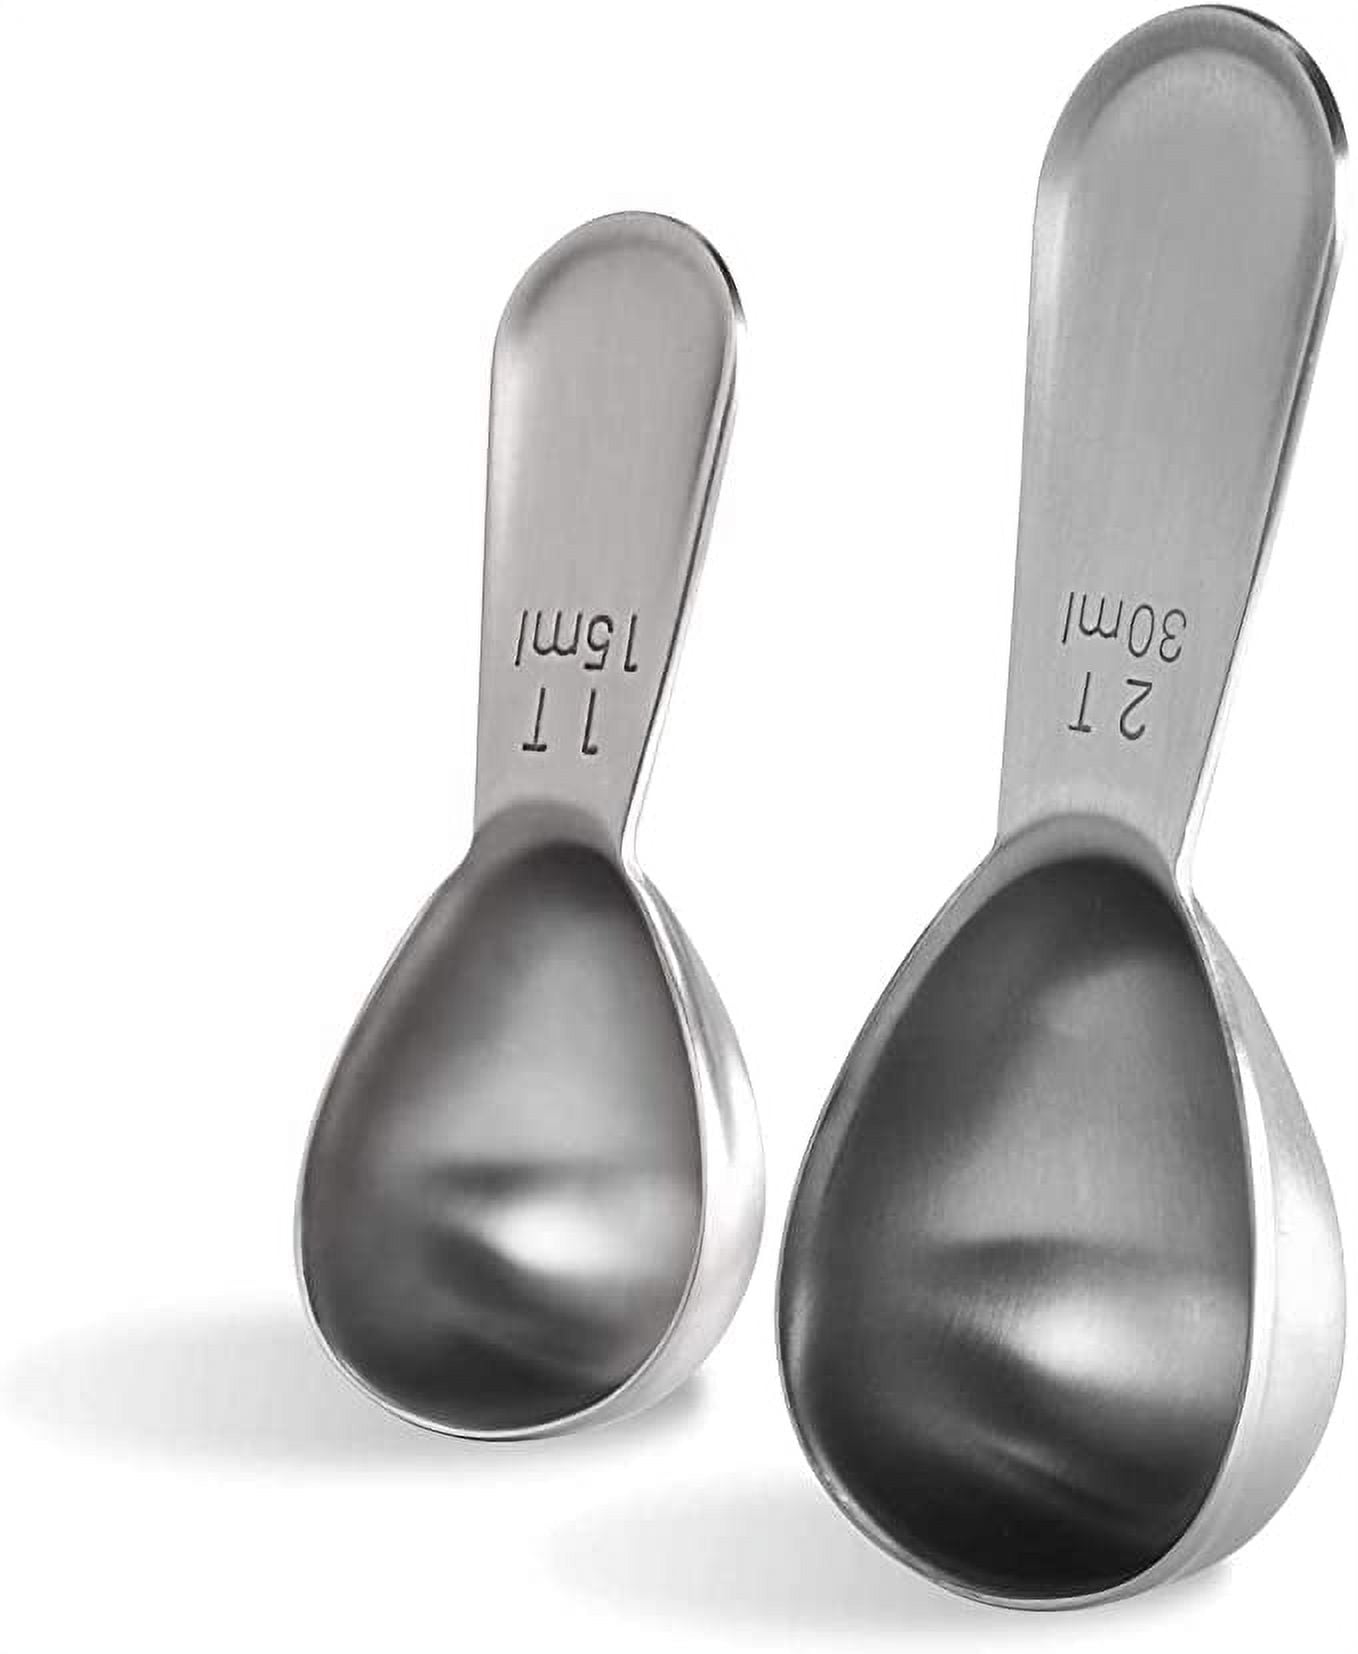 Prepsolutions Stainless Steel 3-Piece Measuring Scoops, Size: Various